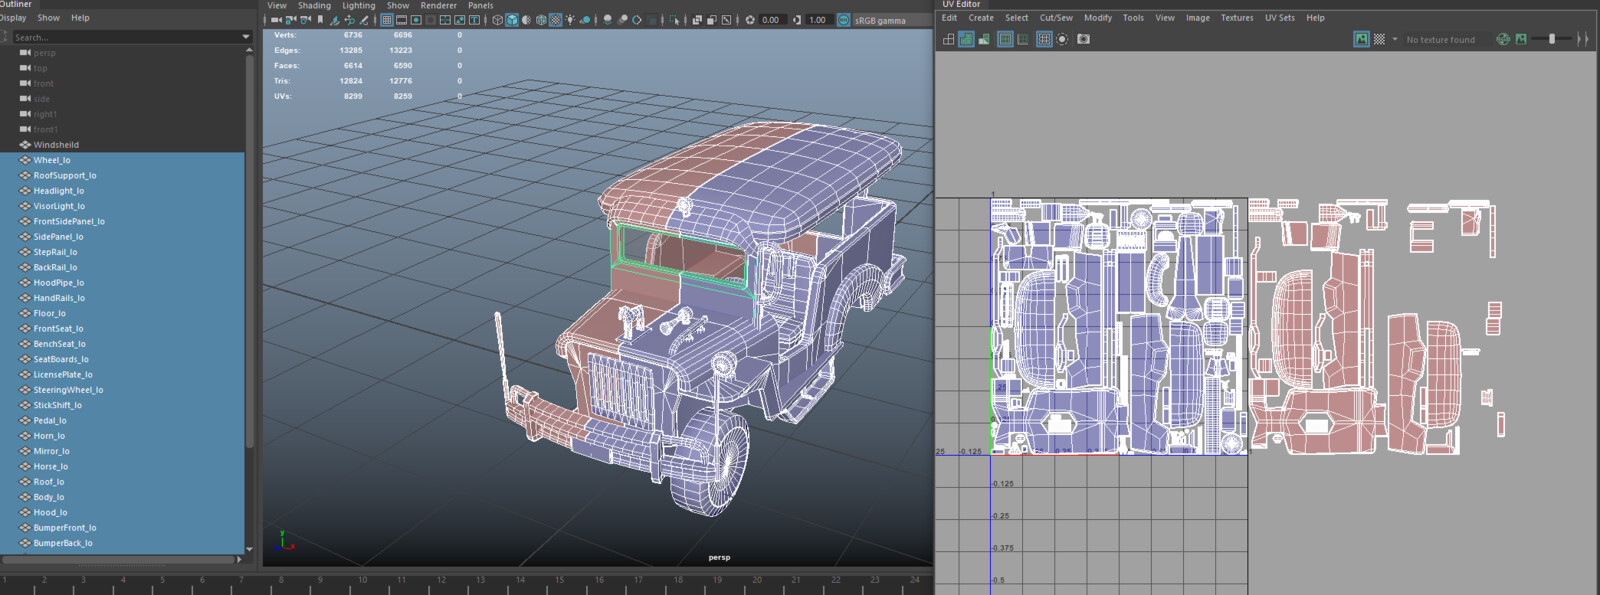 UV layout. I save space by mirroring everything and duplicating detail parts like tires, lights, etc.